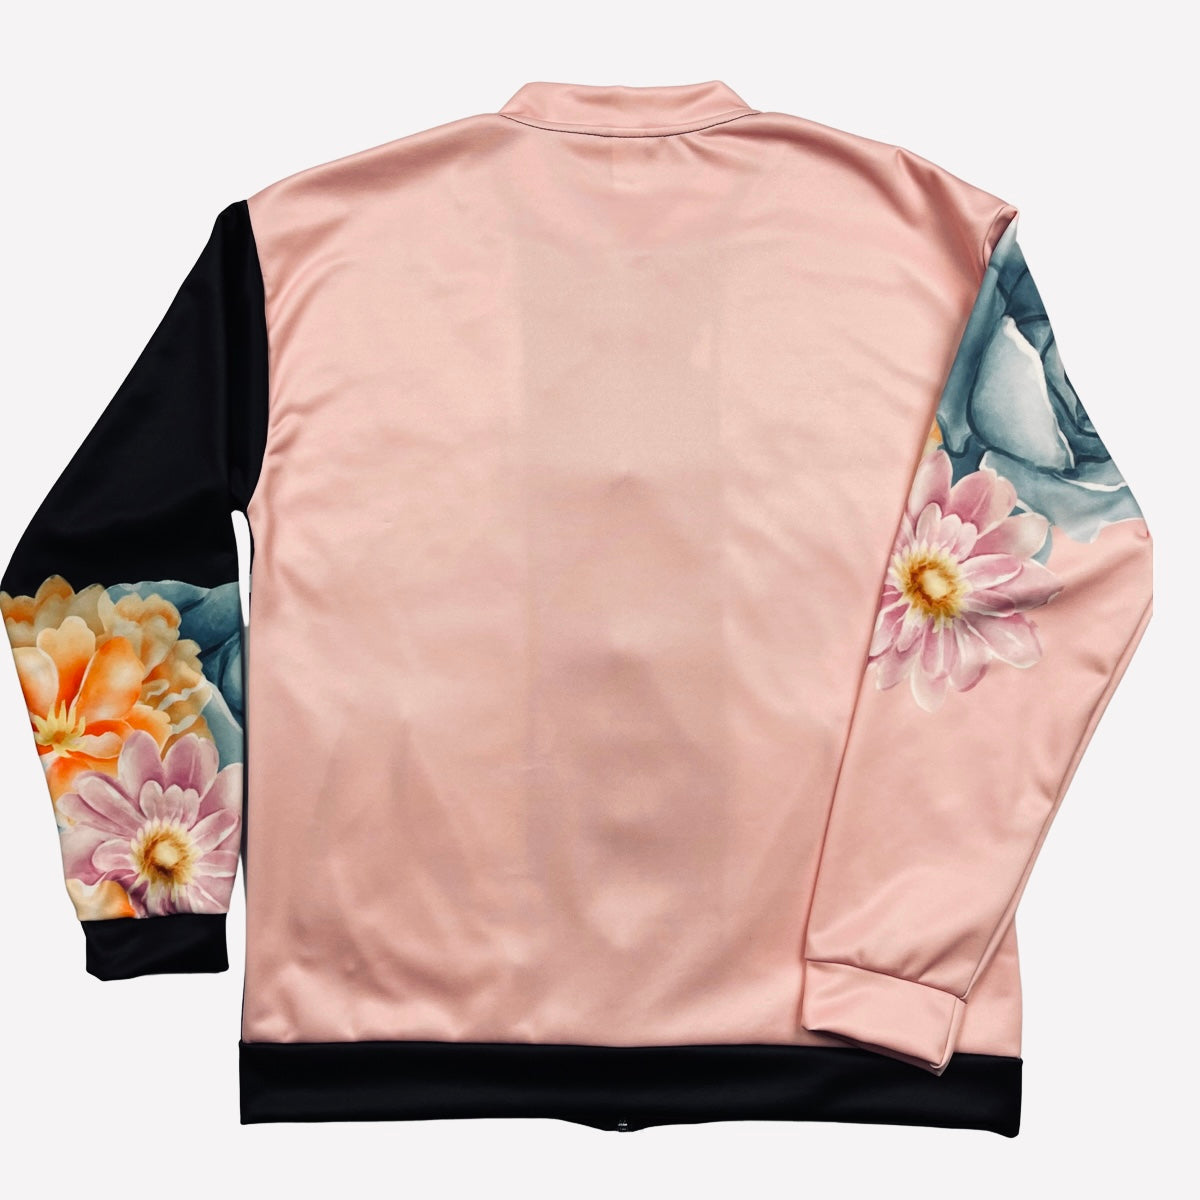 Hand Sewn Floral Jacket